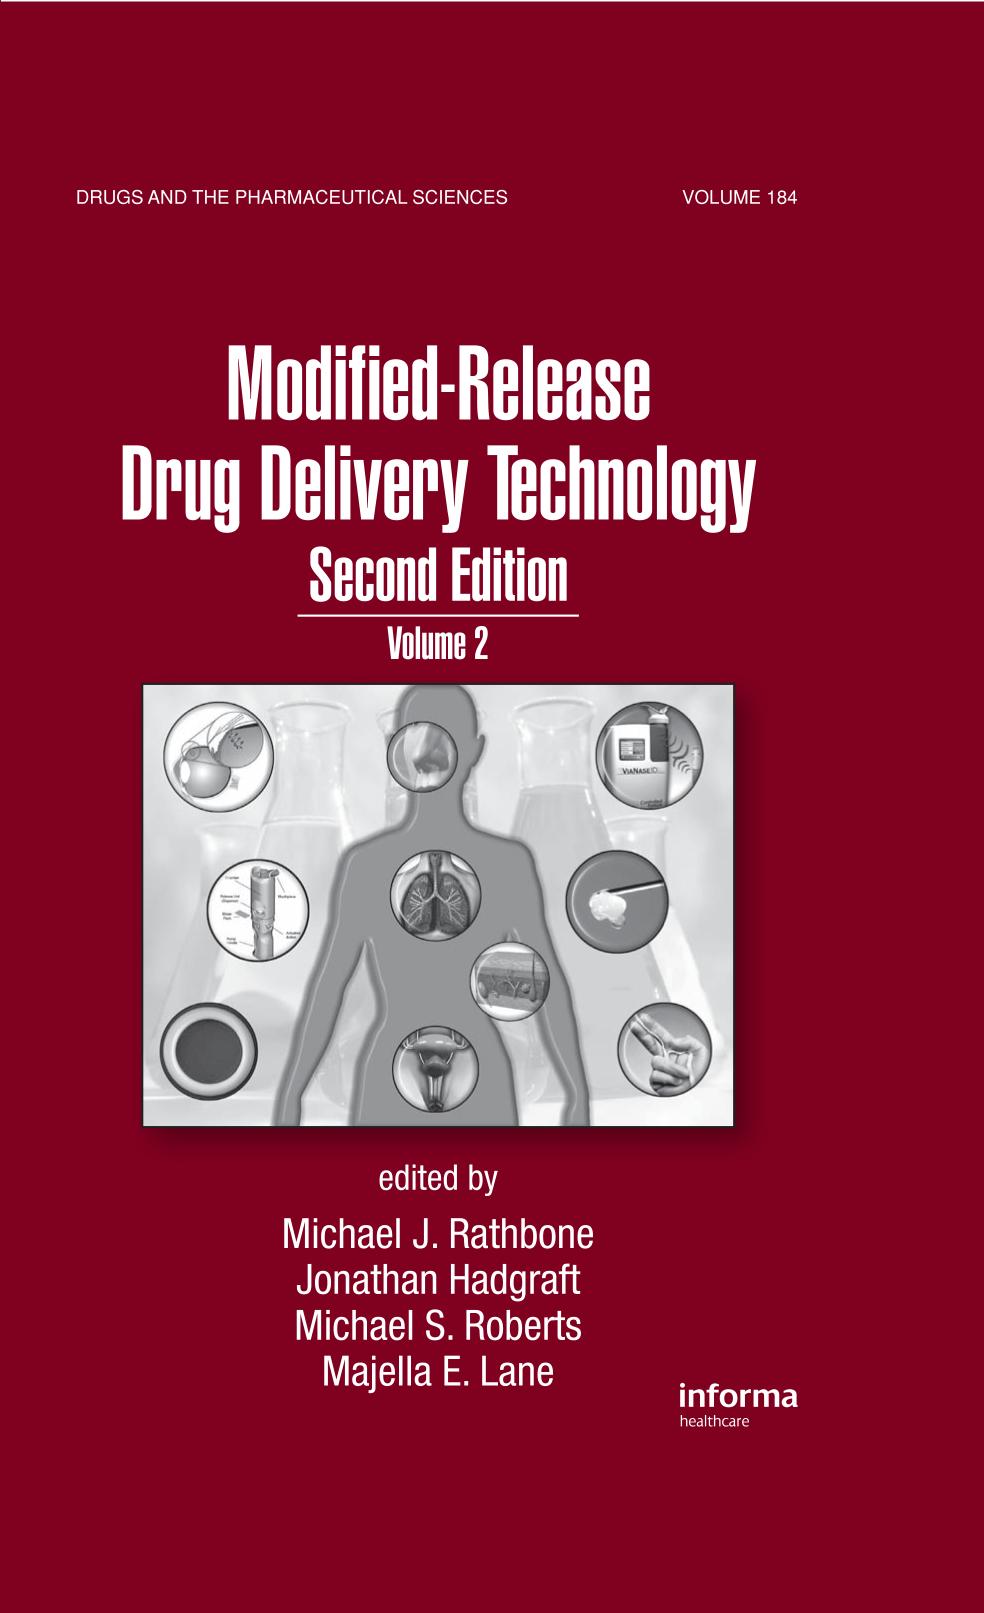 Modified-release drug delivery technology. Volume 2